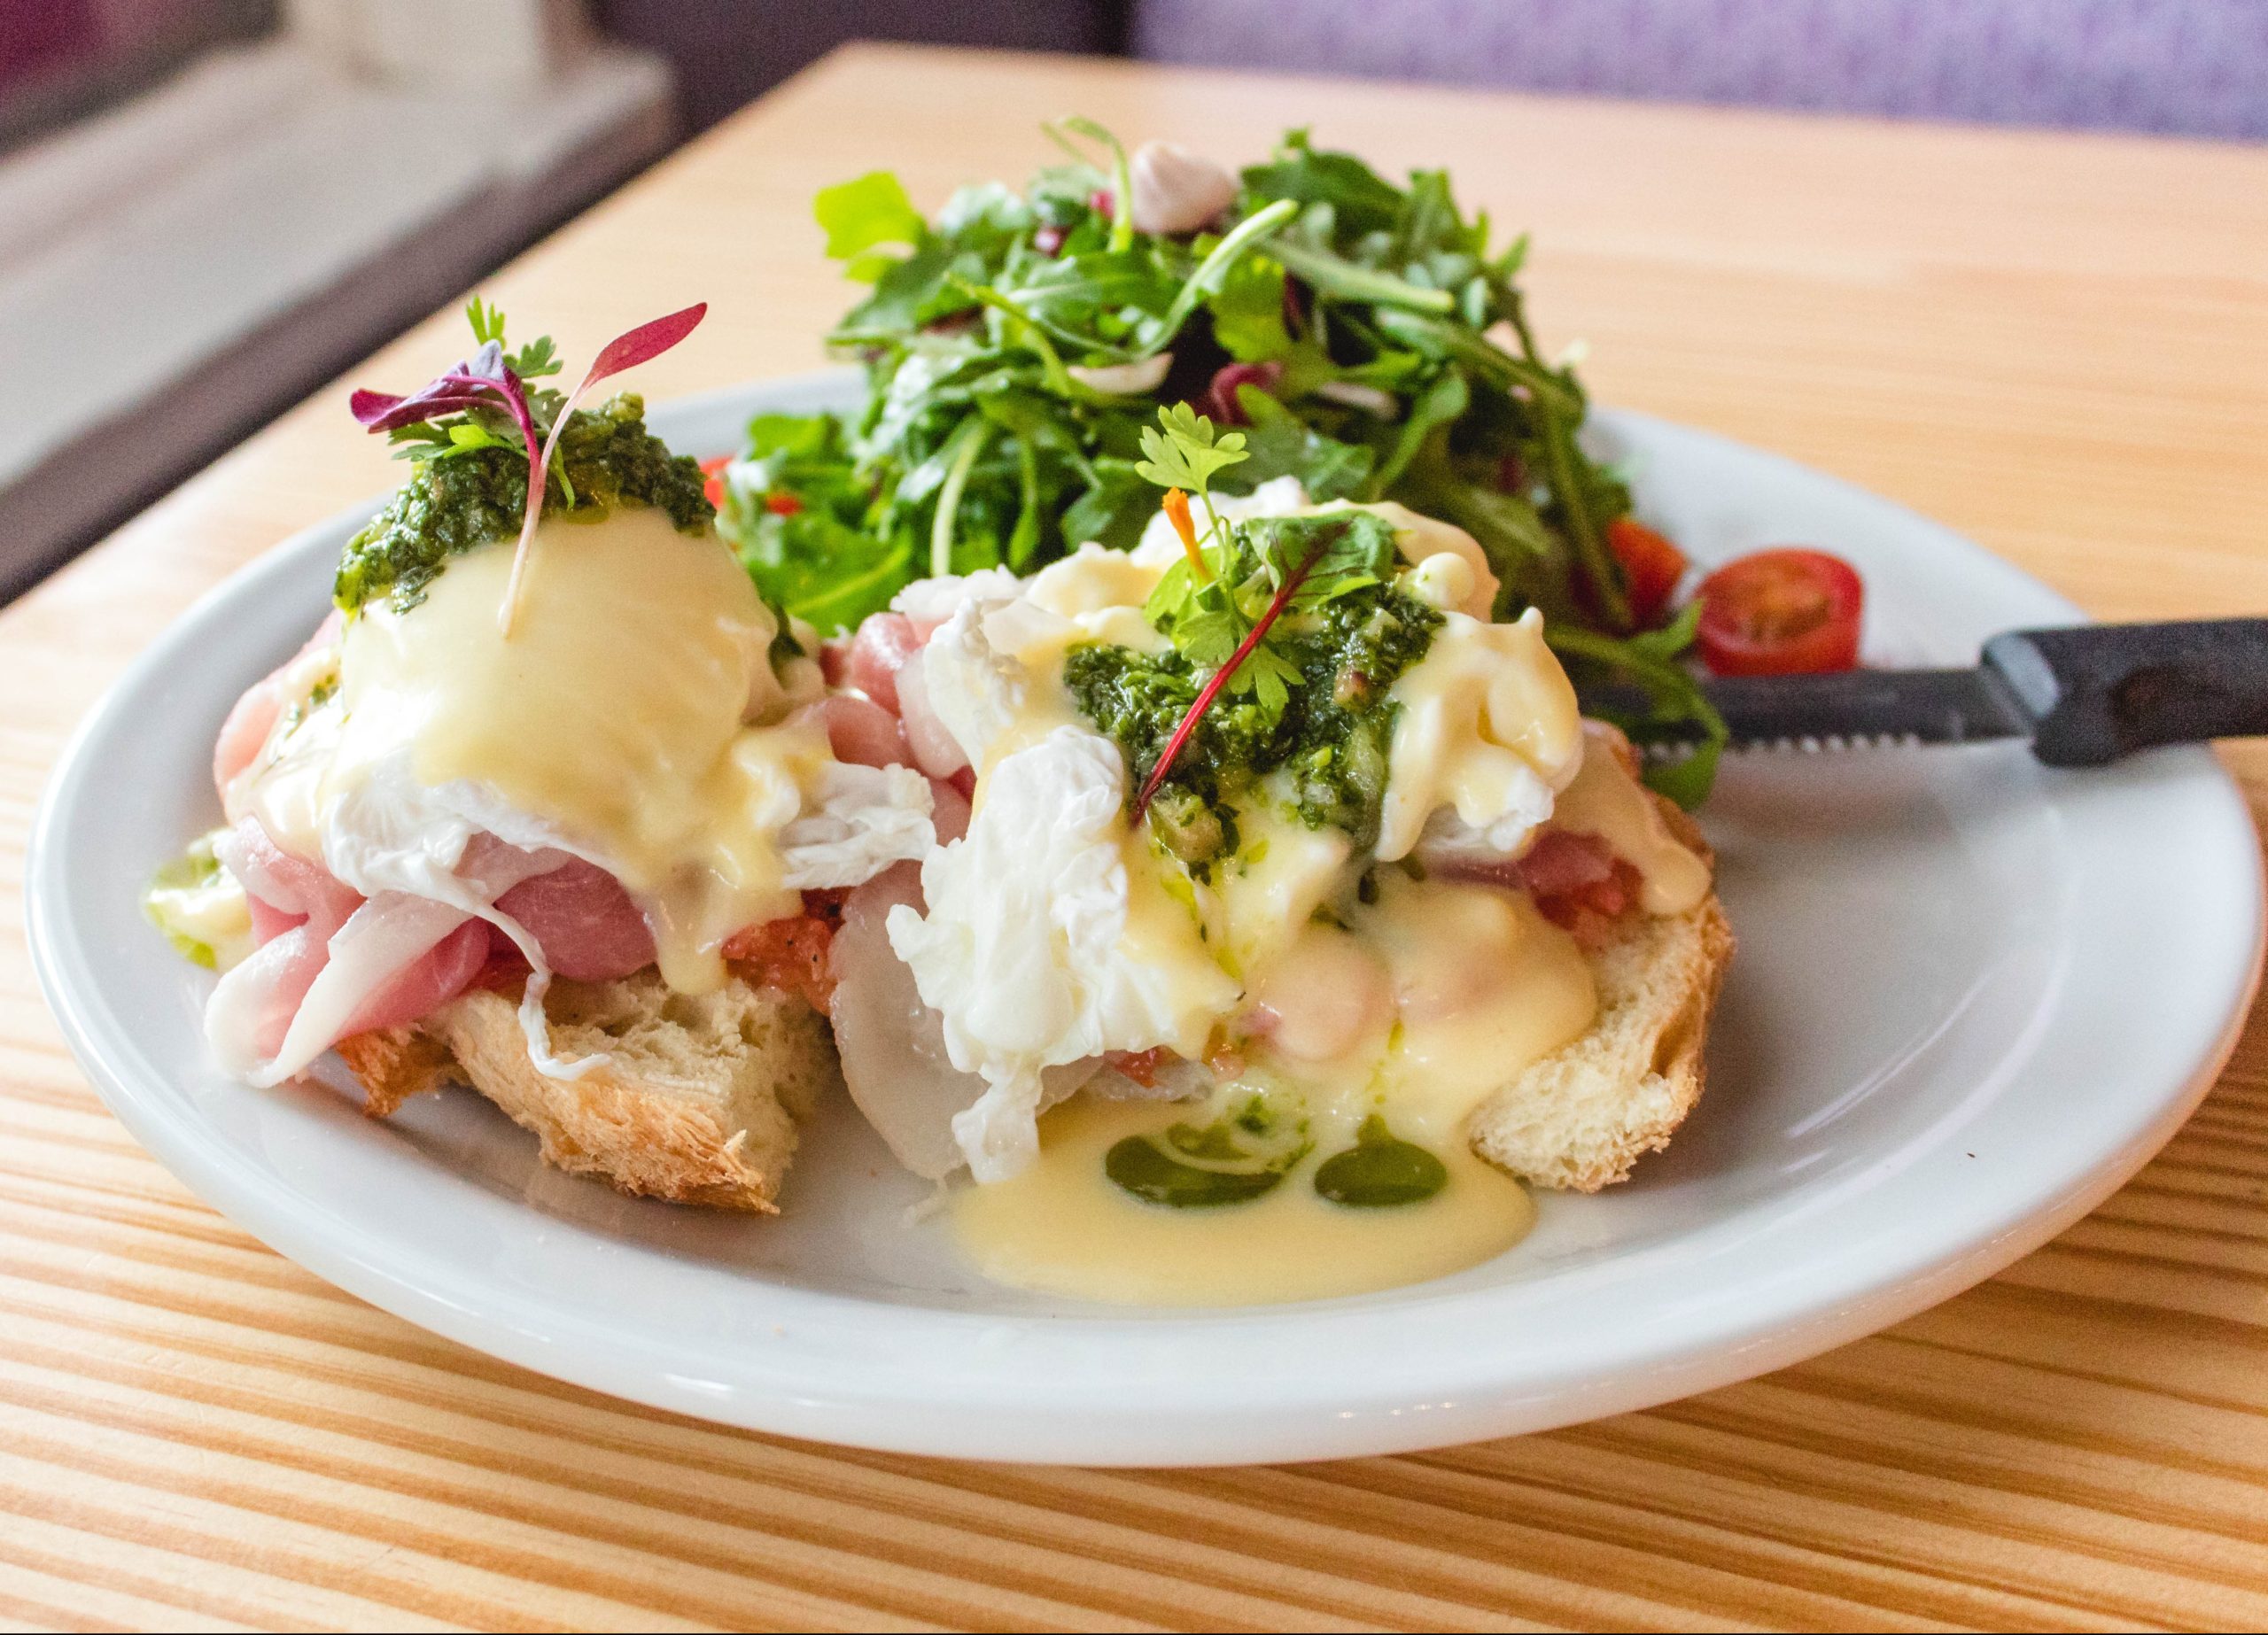 Lolita’s Brunch Gives You One More Reason To Go